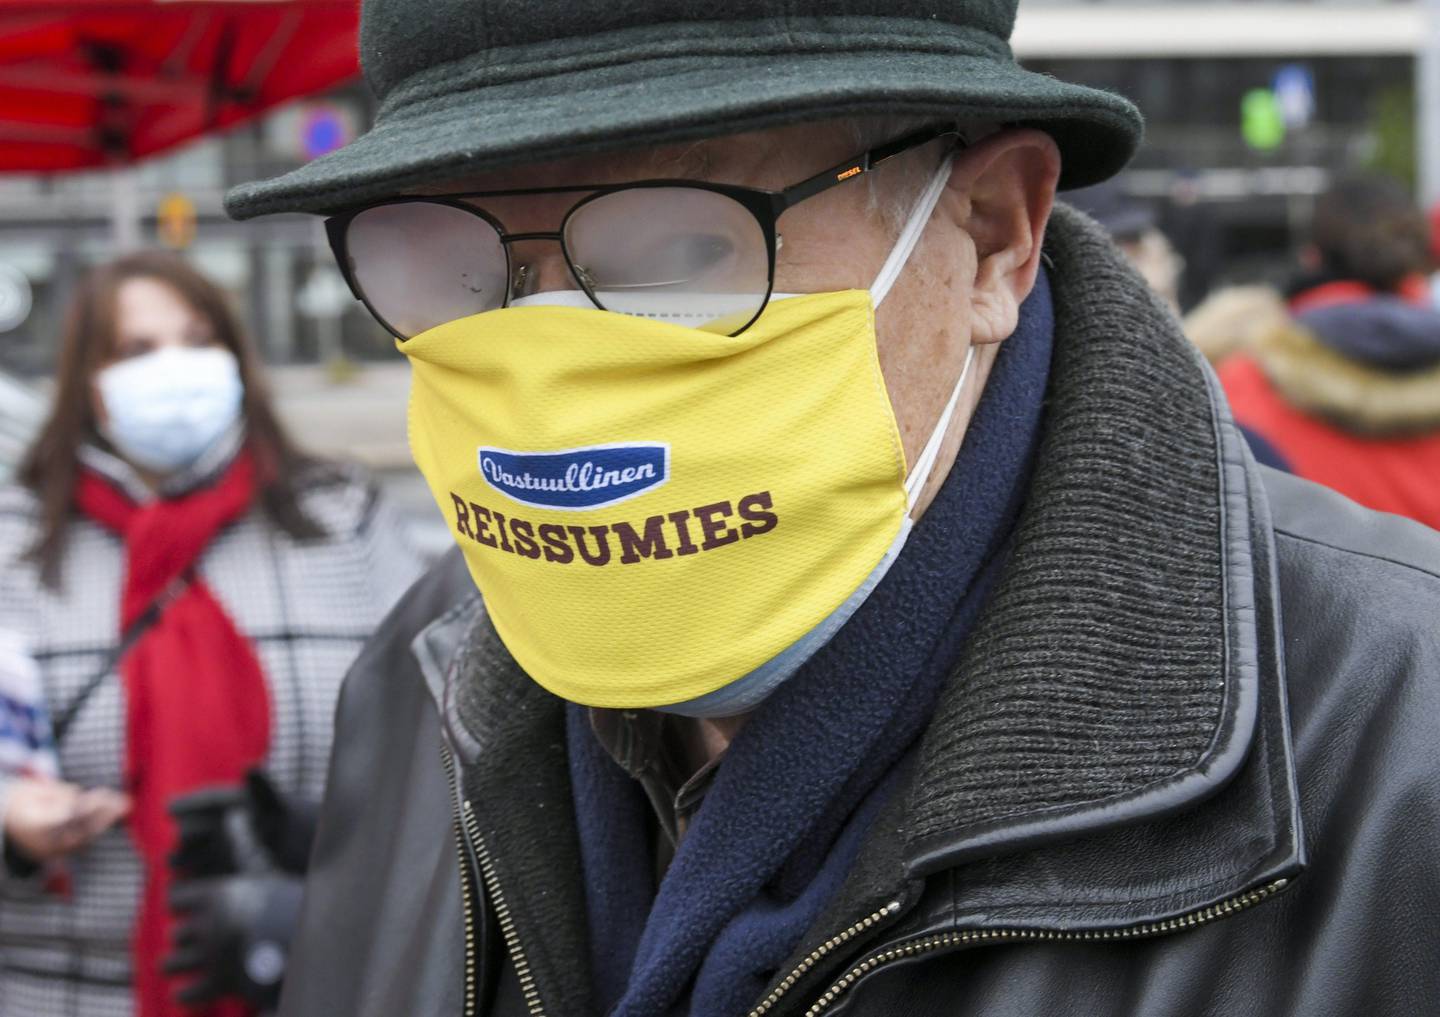 Elderly man with fuzzy eye glasses wears a face mask at the Hakaniemi Sunday market in Helsinki, Finland, on  November 1, 2020, amid the novel coronavirus COVID-19 pandemic. - Finland has now 16 291 confirmed cases of Covid-19 with 358 fatalities. (Photo by Markku Ulander / Lehtikuva / AFP) / Finland OUT